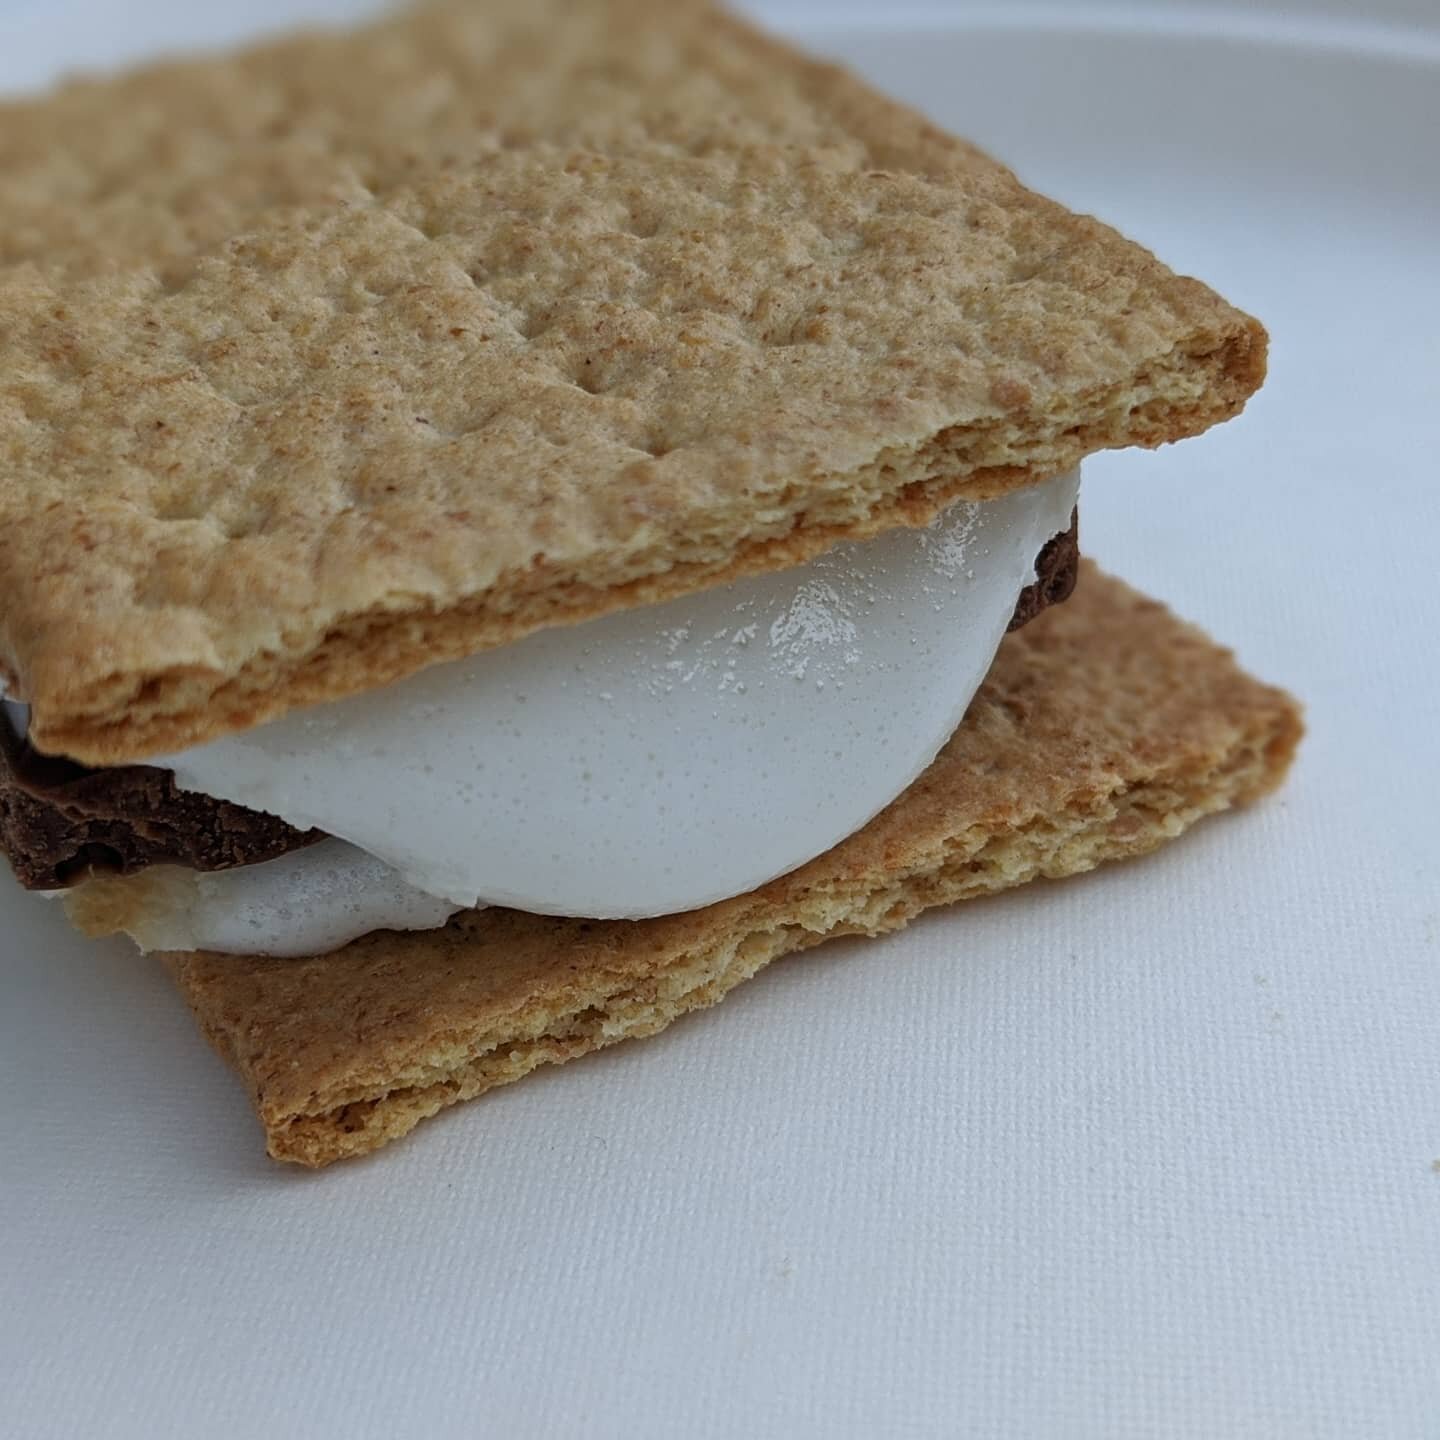 Gimme s'more summer! 

#gimme #smores #chocolate #marshmallow #campfire #cookingwithkids #lohudfood #lohudfoodie #westchesternymoms #westchesternyeats